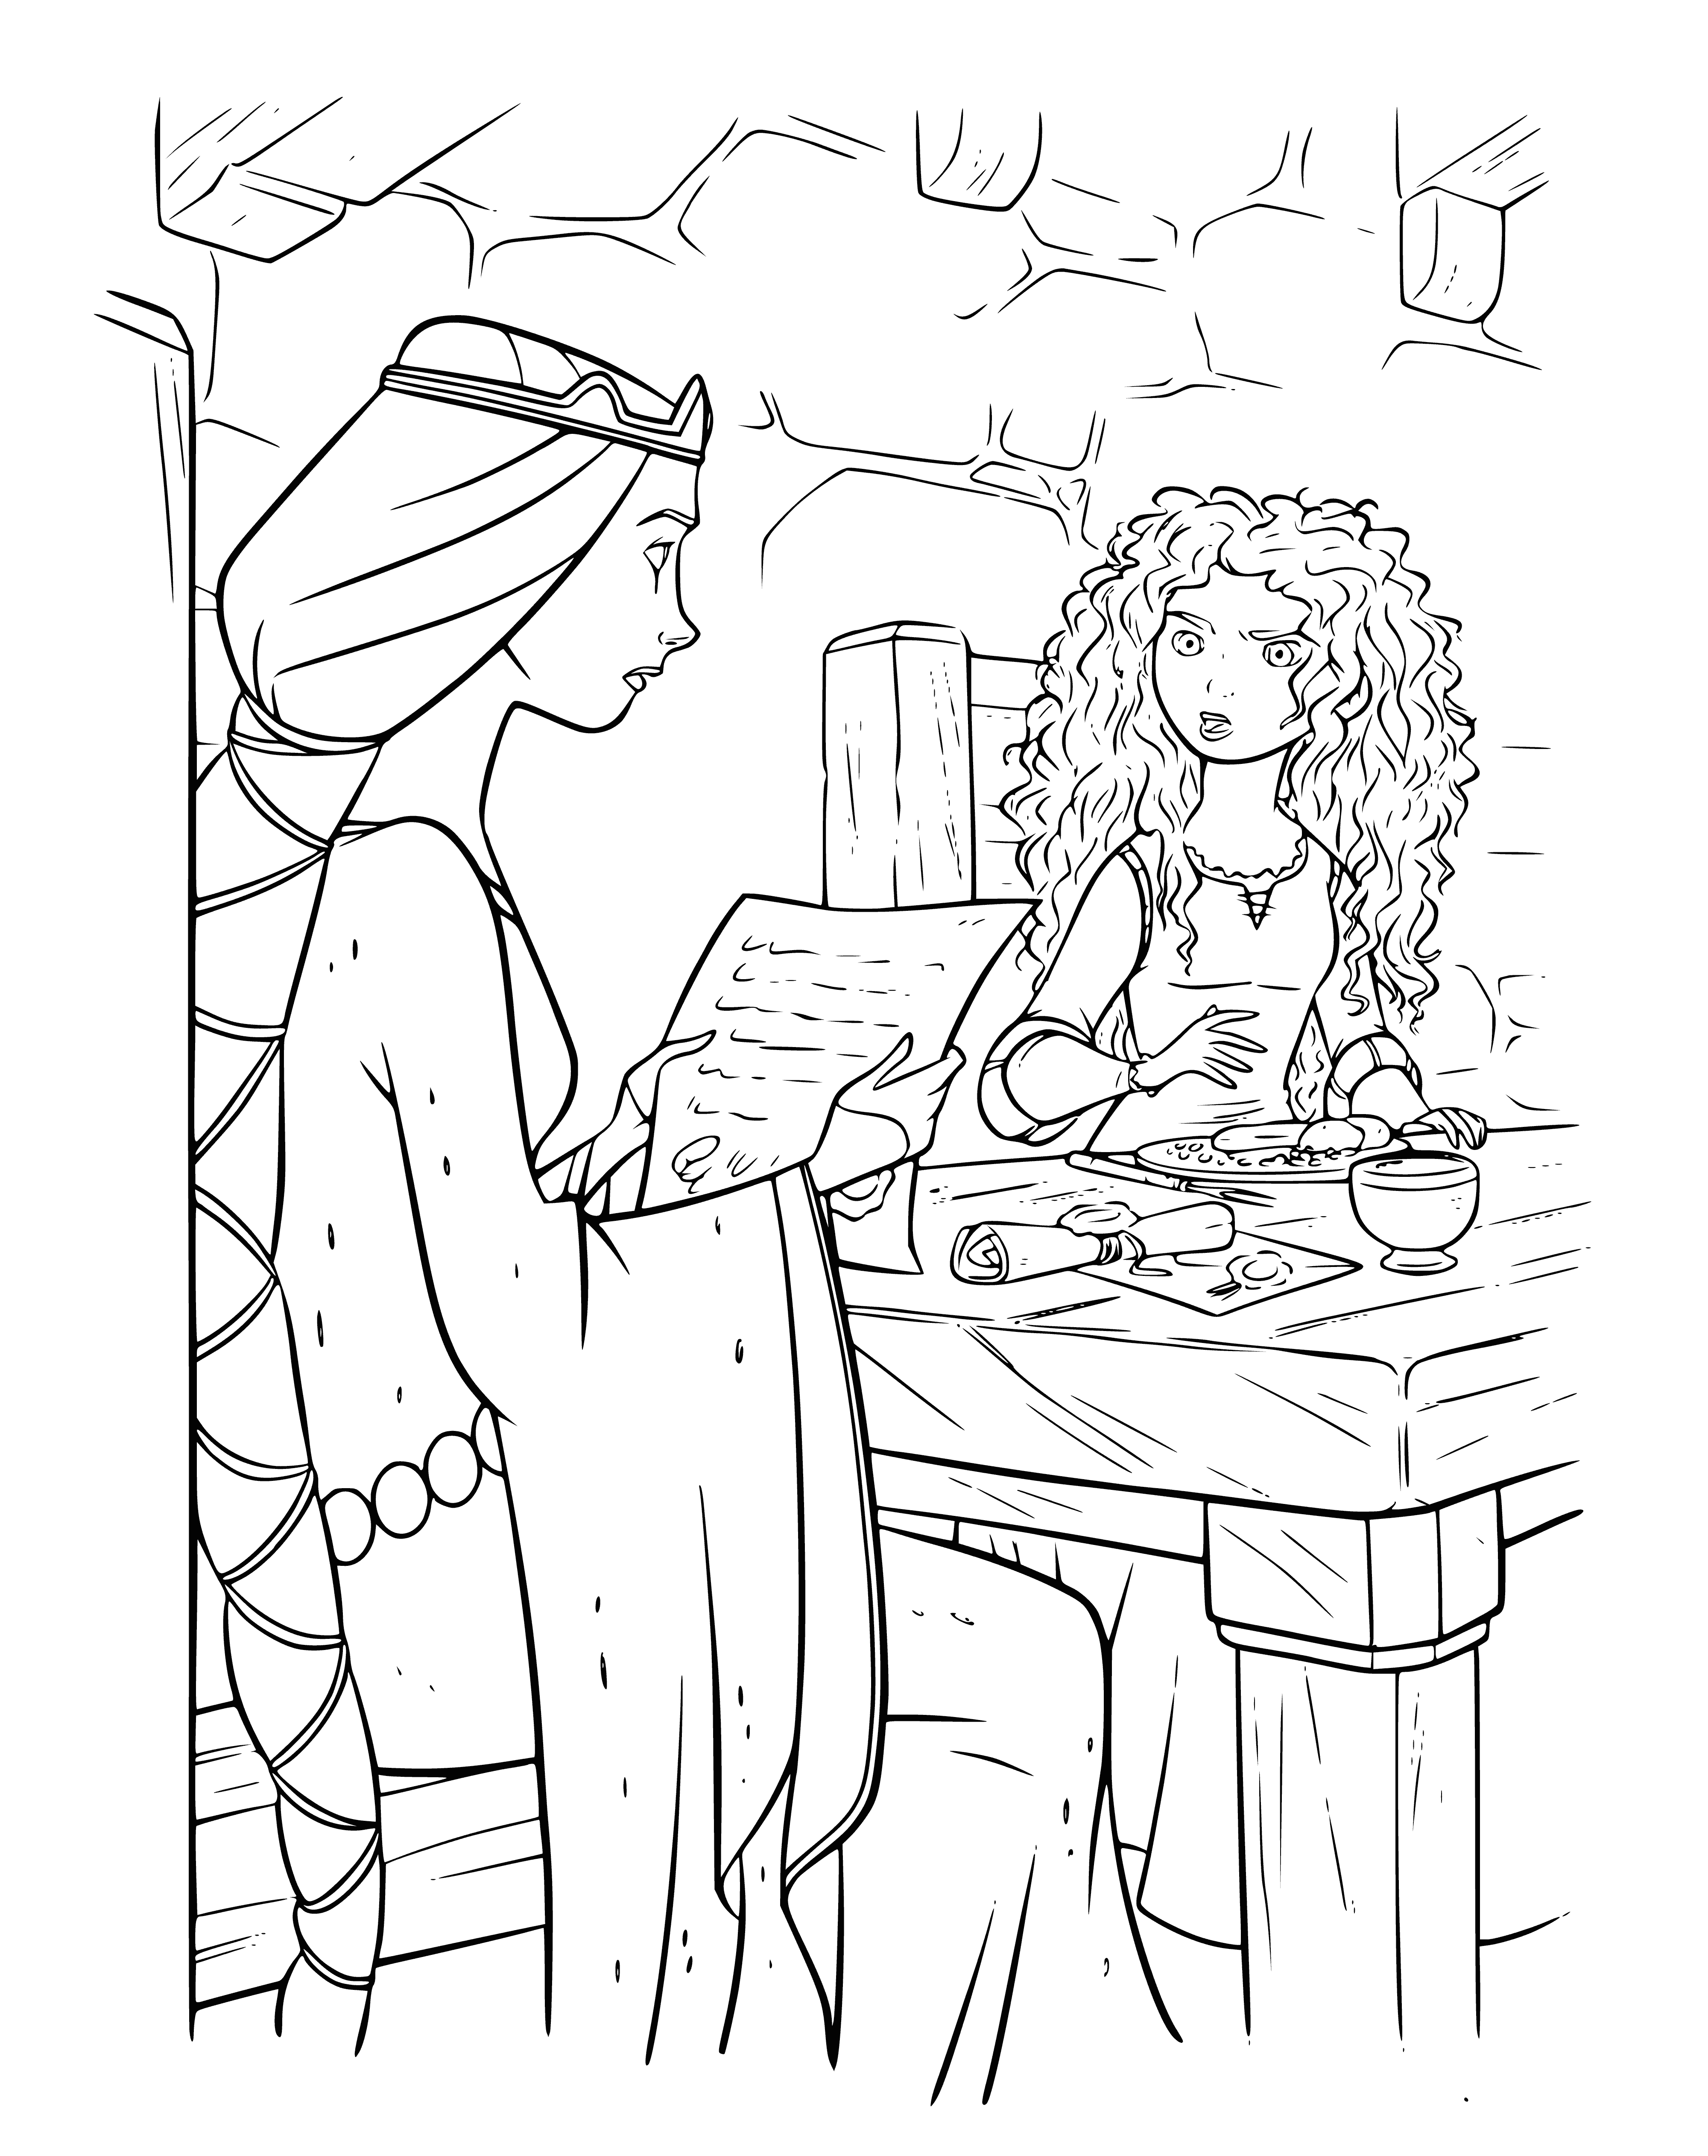 The Queen reads a letter to Princess Merida coloring page